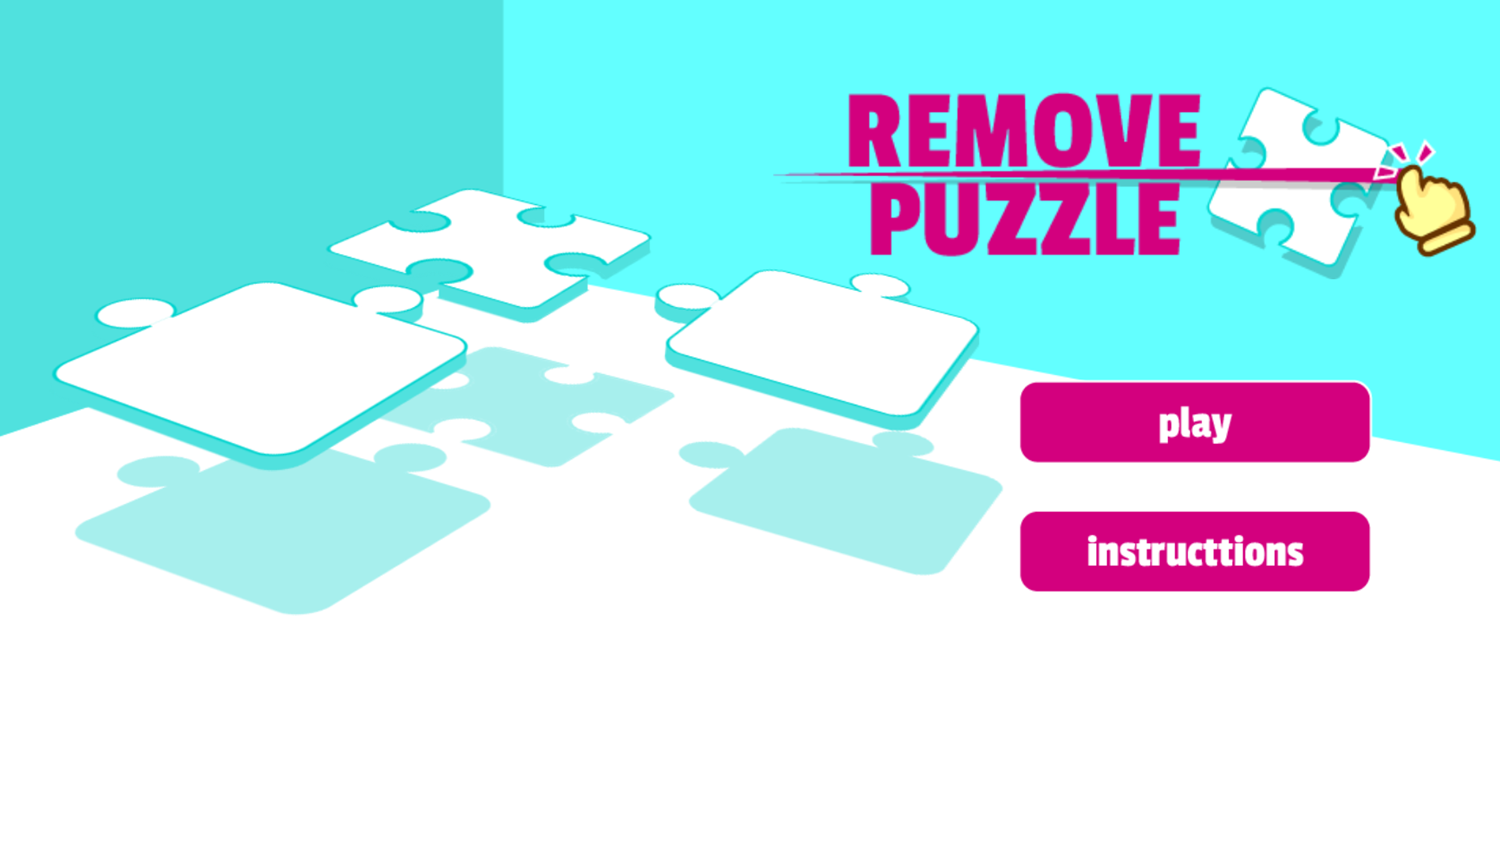 Remove Puzzle Game Welcome Screen Screenshot.